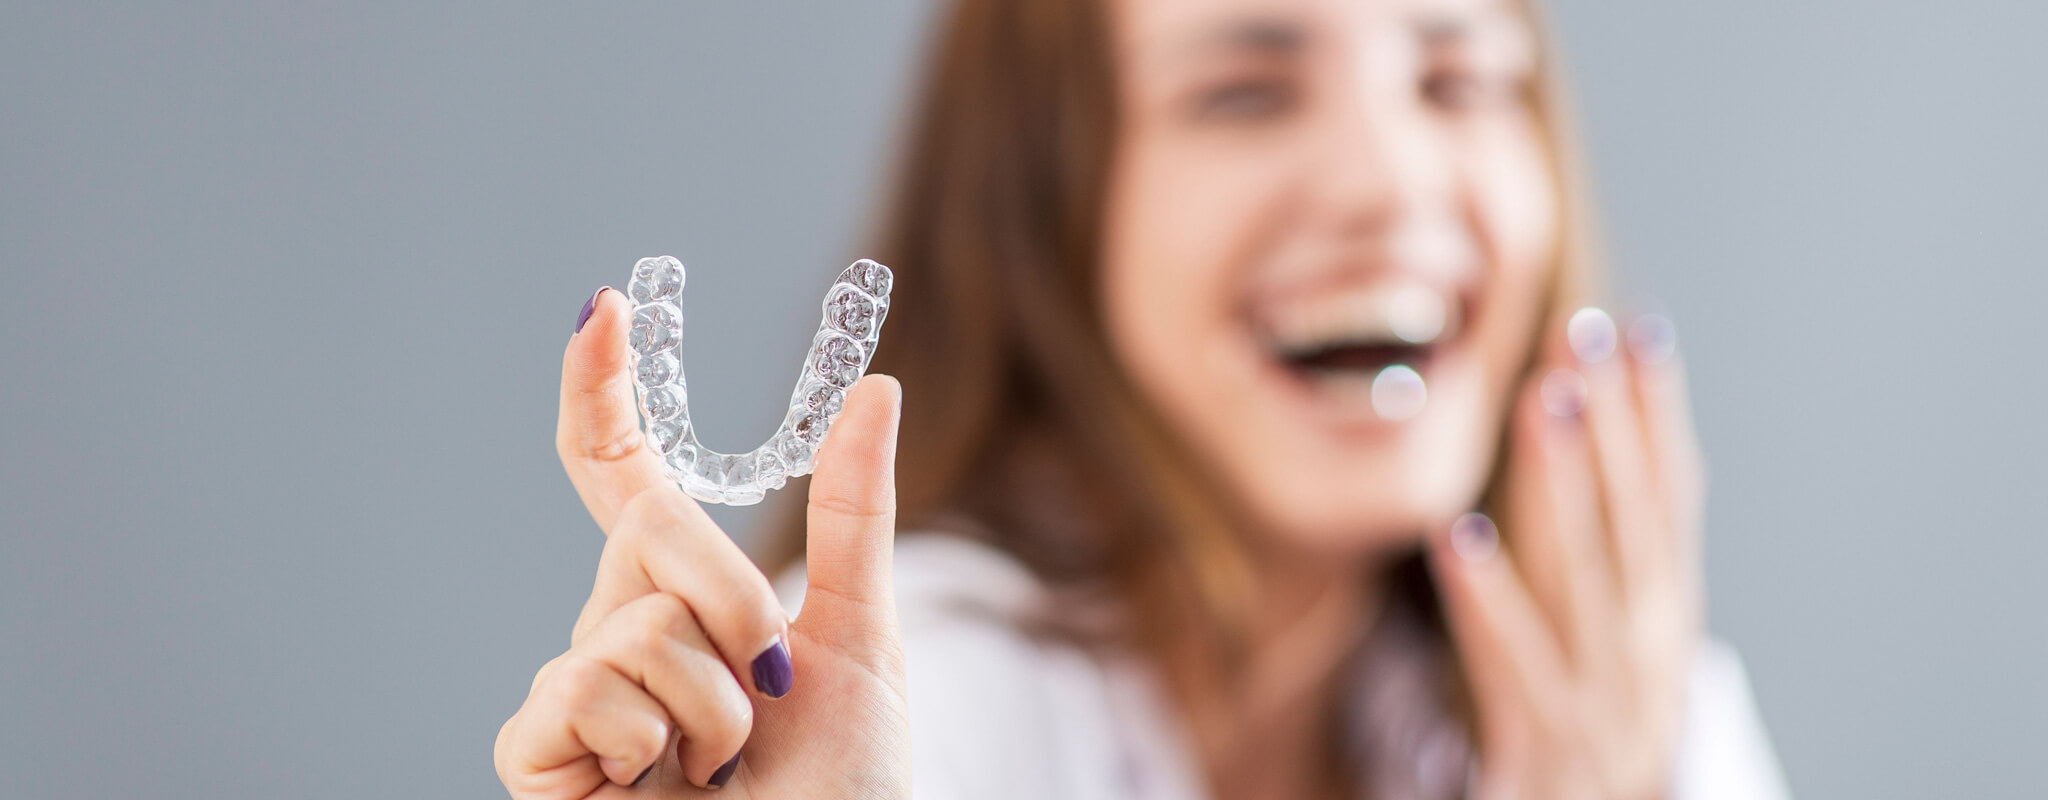 adult shows off her invisalign tray on her first day with Invisalign